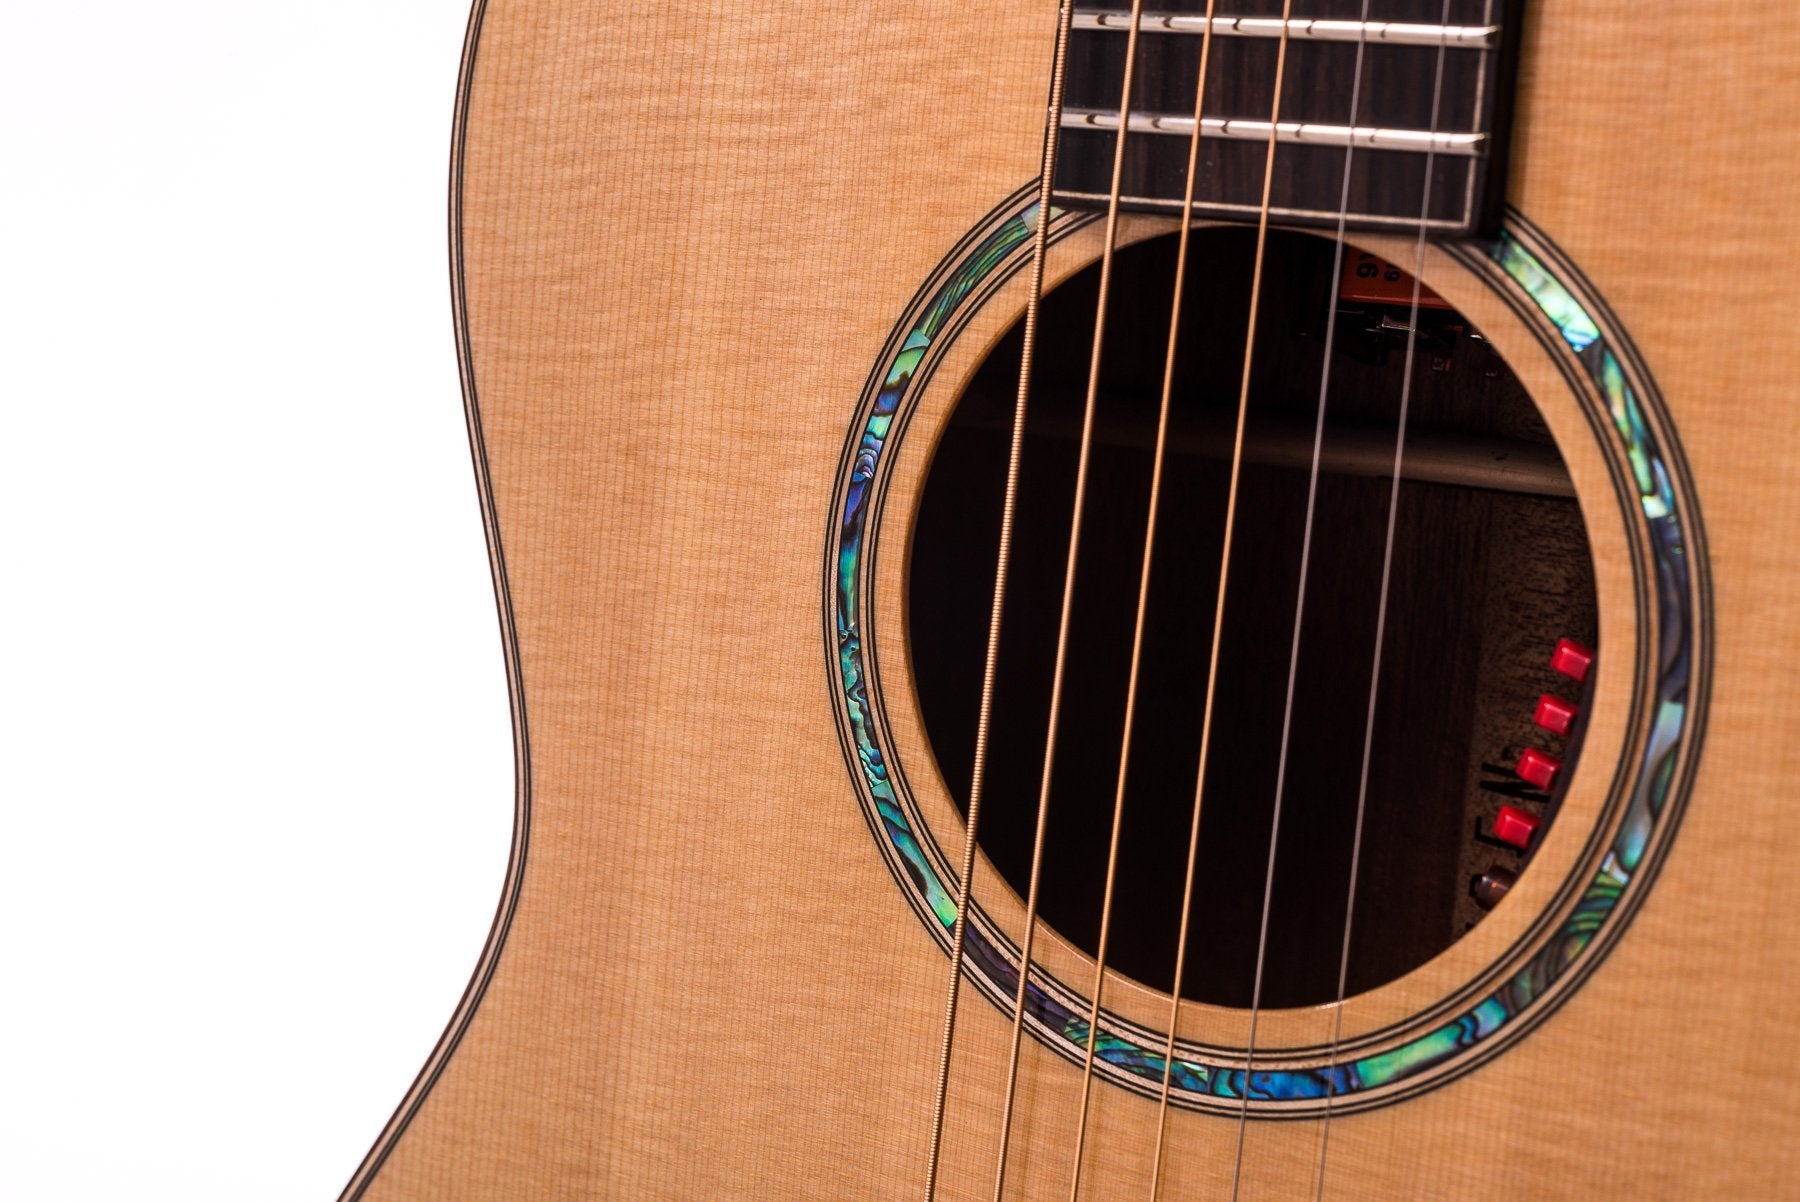 AUDEN MAHOGANY SERIES – JULIA SPRUCE FULL BODY, Electro Acoustic Guitar for sale at Richards Guitars.